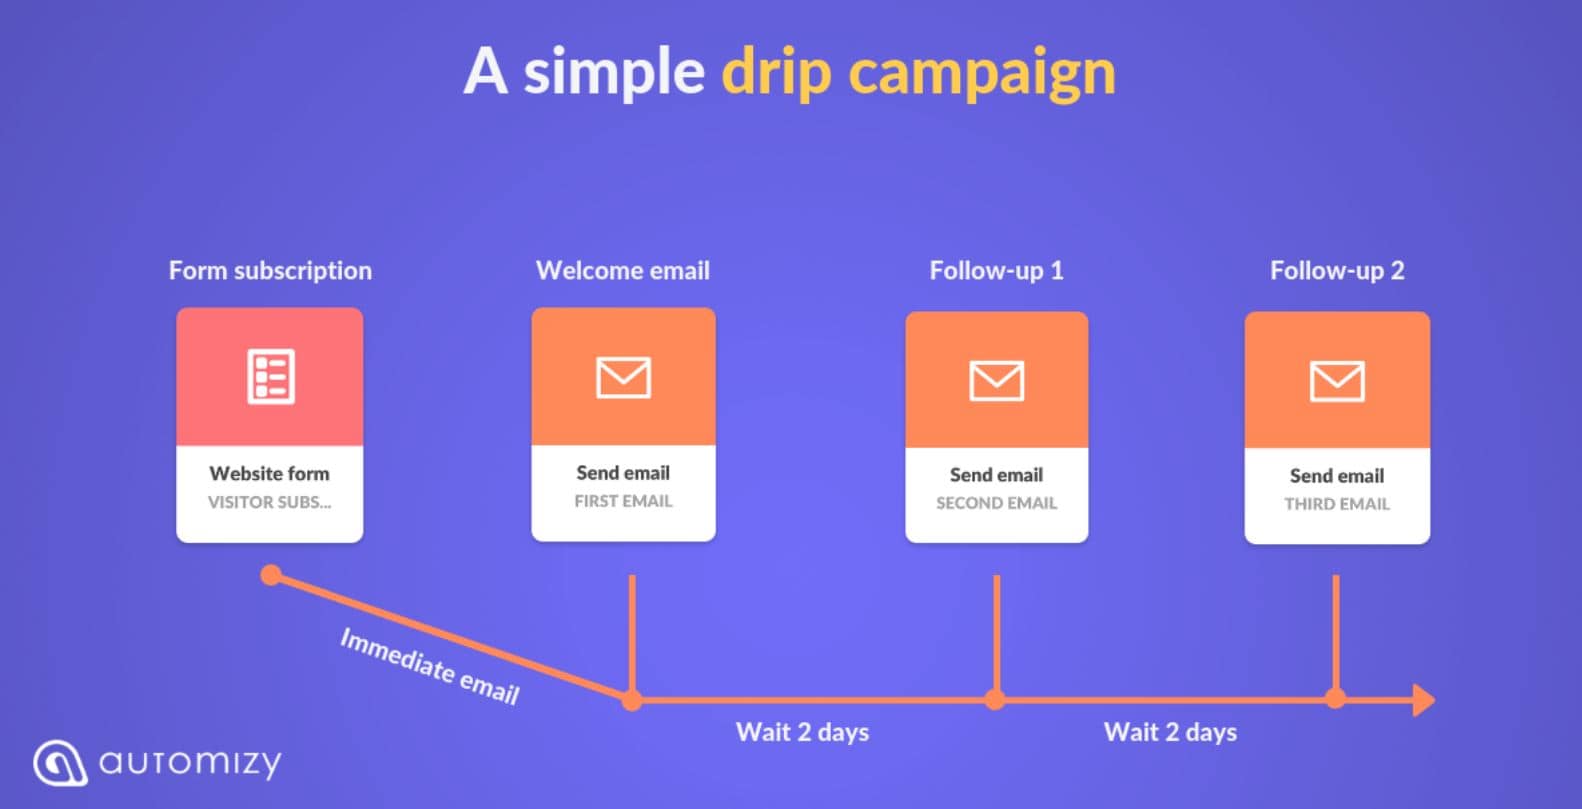 drip campaign infographic by Automizy